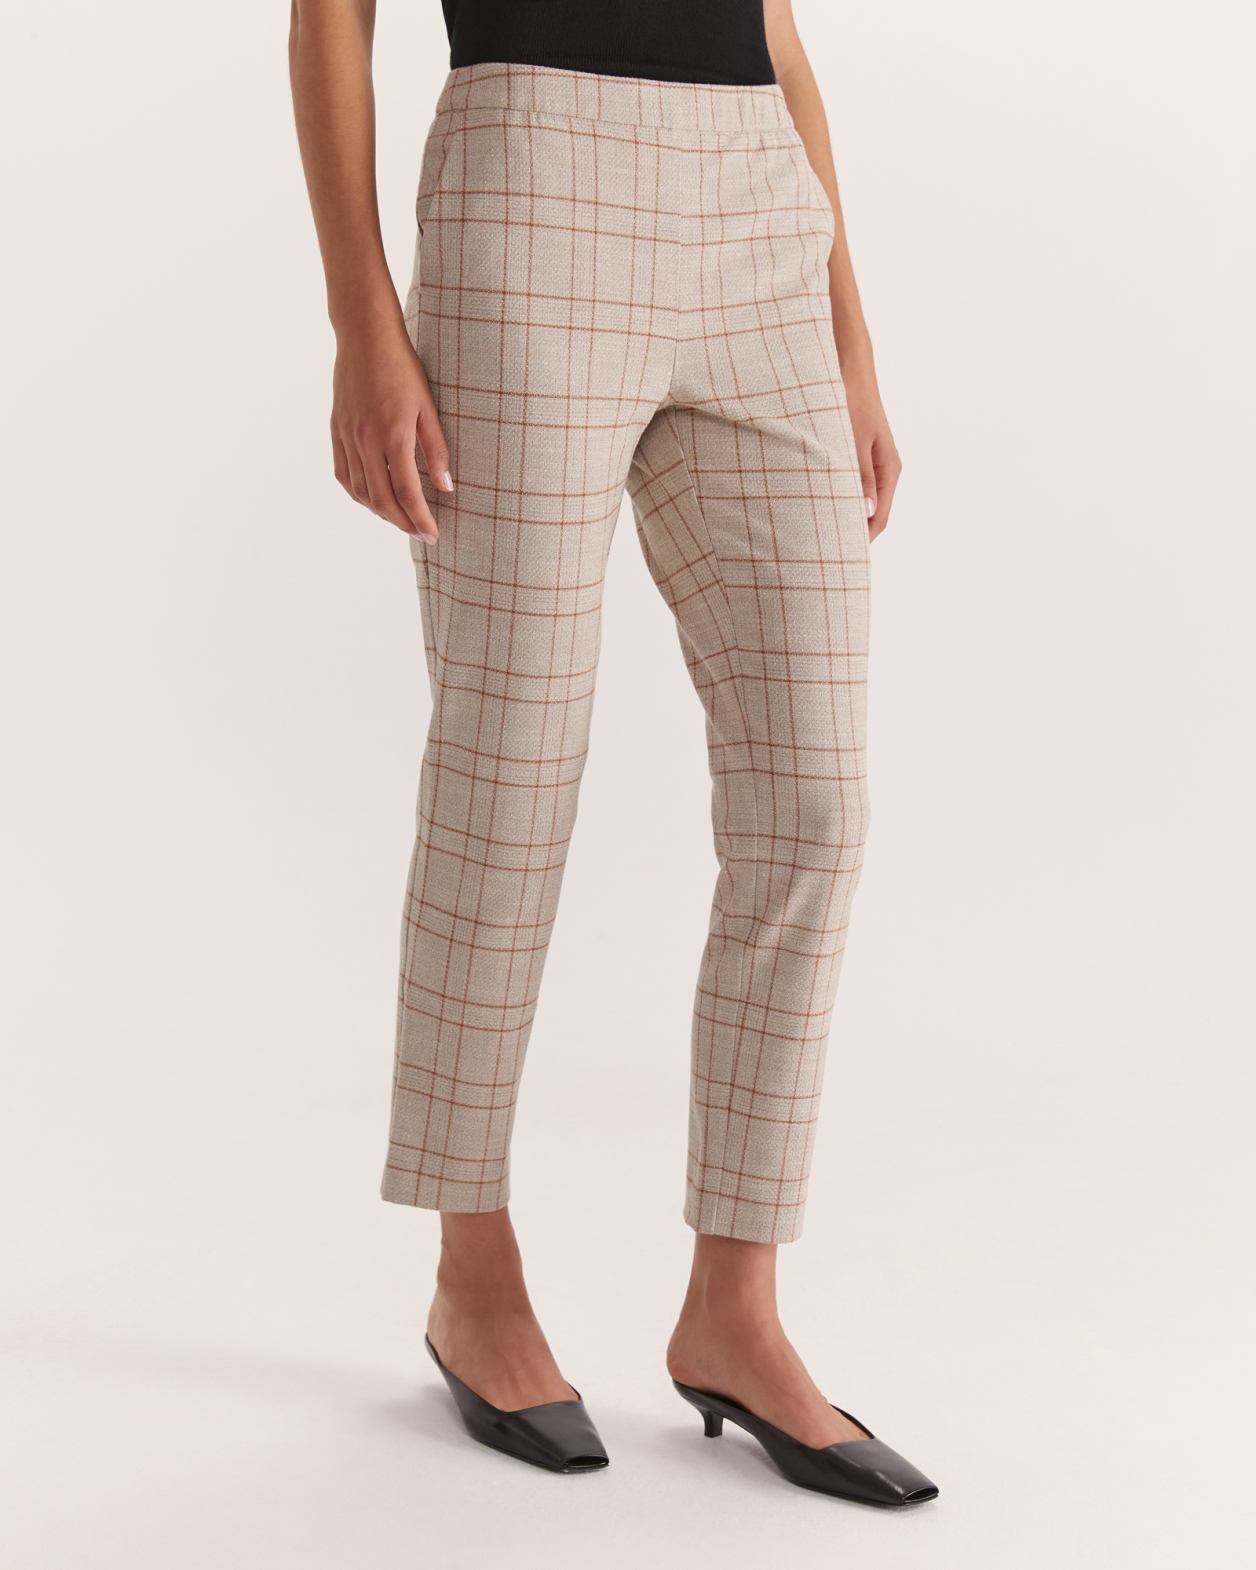 Anastasia Check Pull On Pant in MULTI